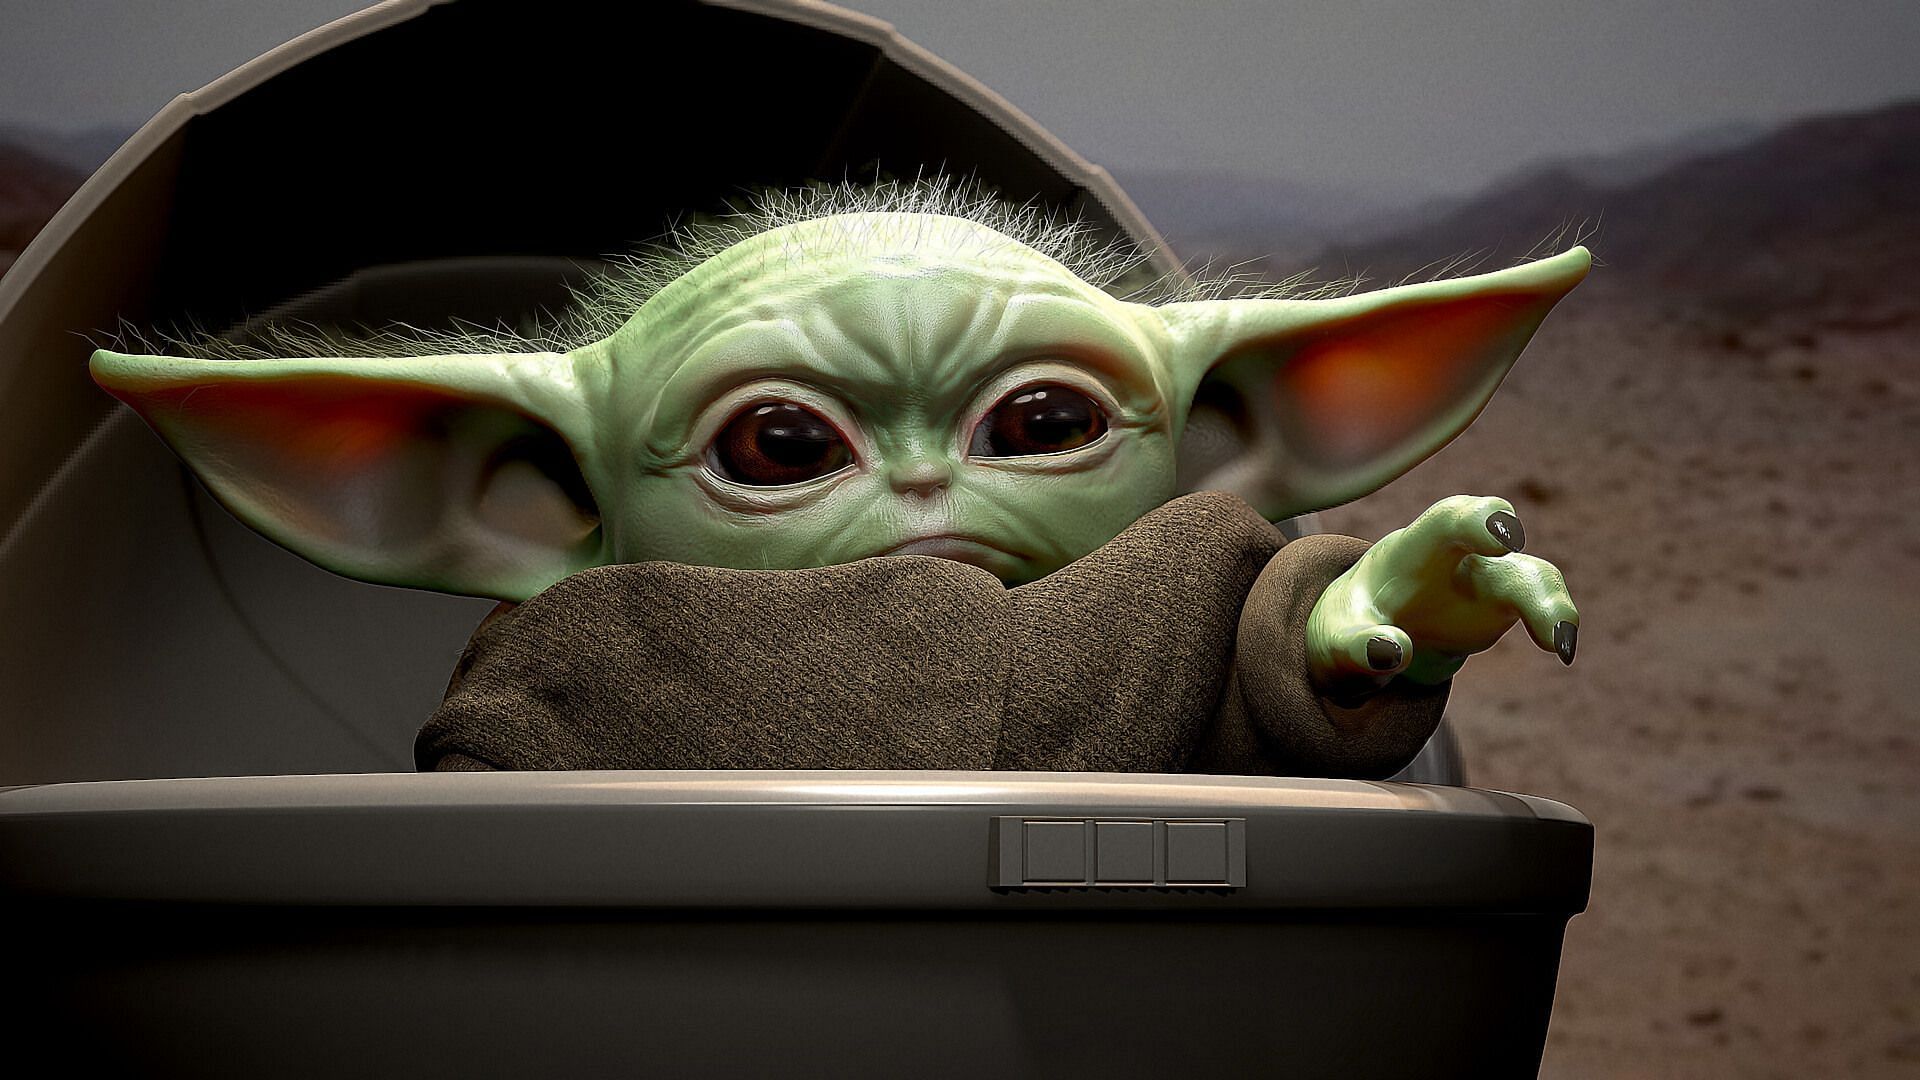 How can Baby Yoda be 50 years old?